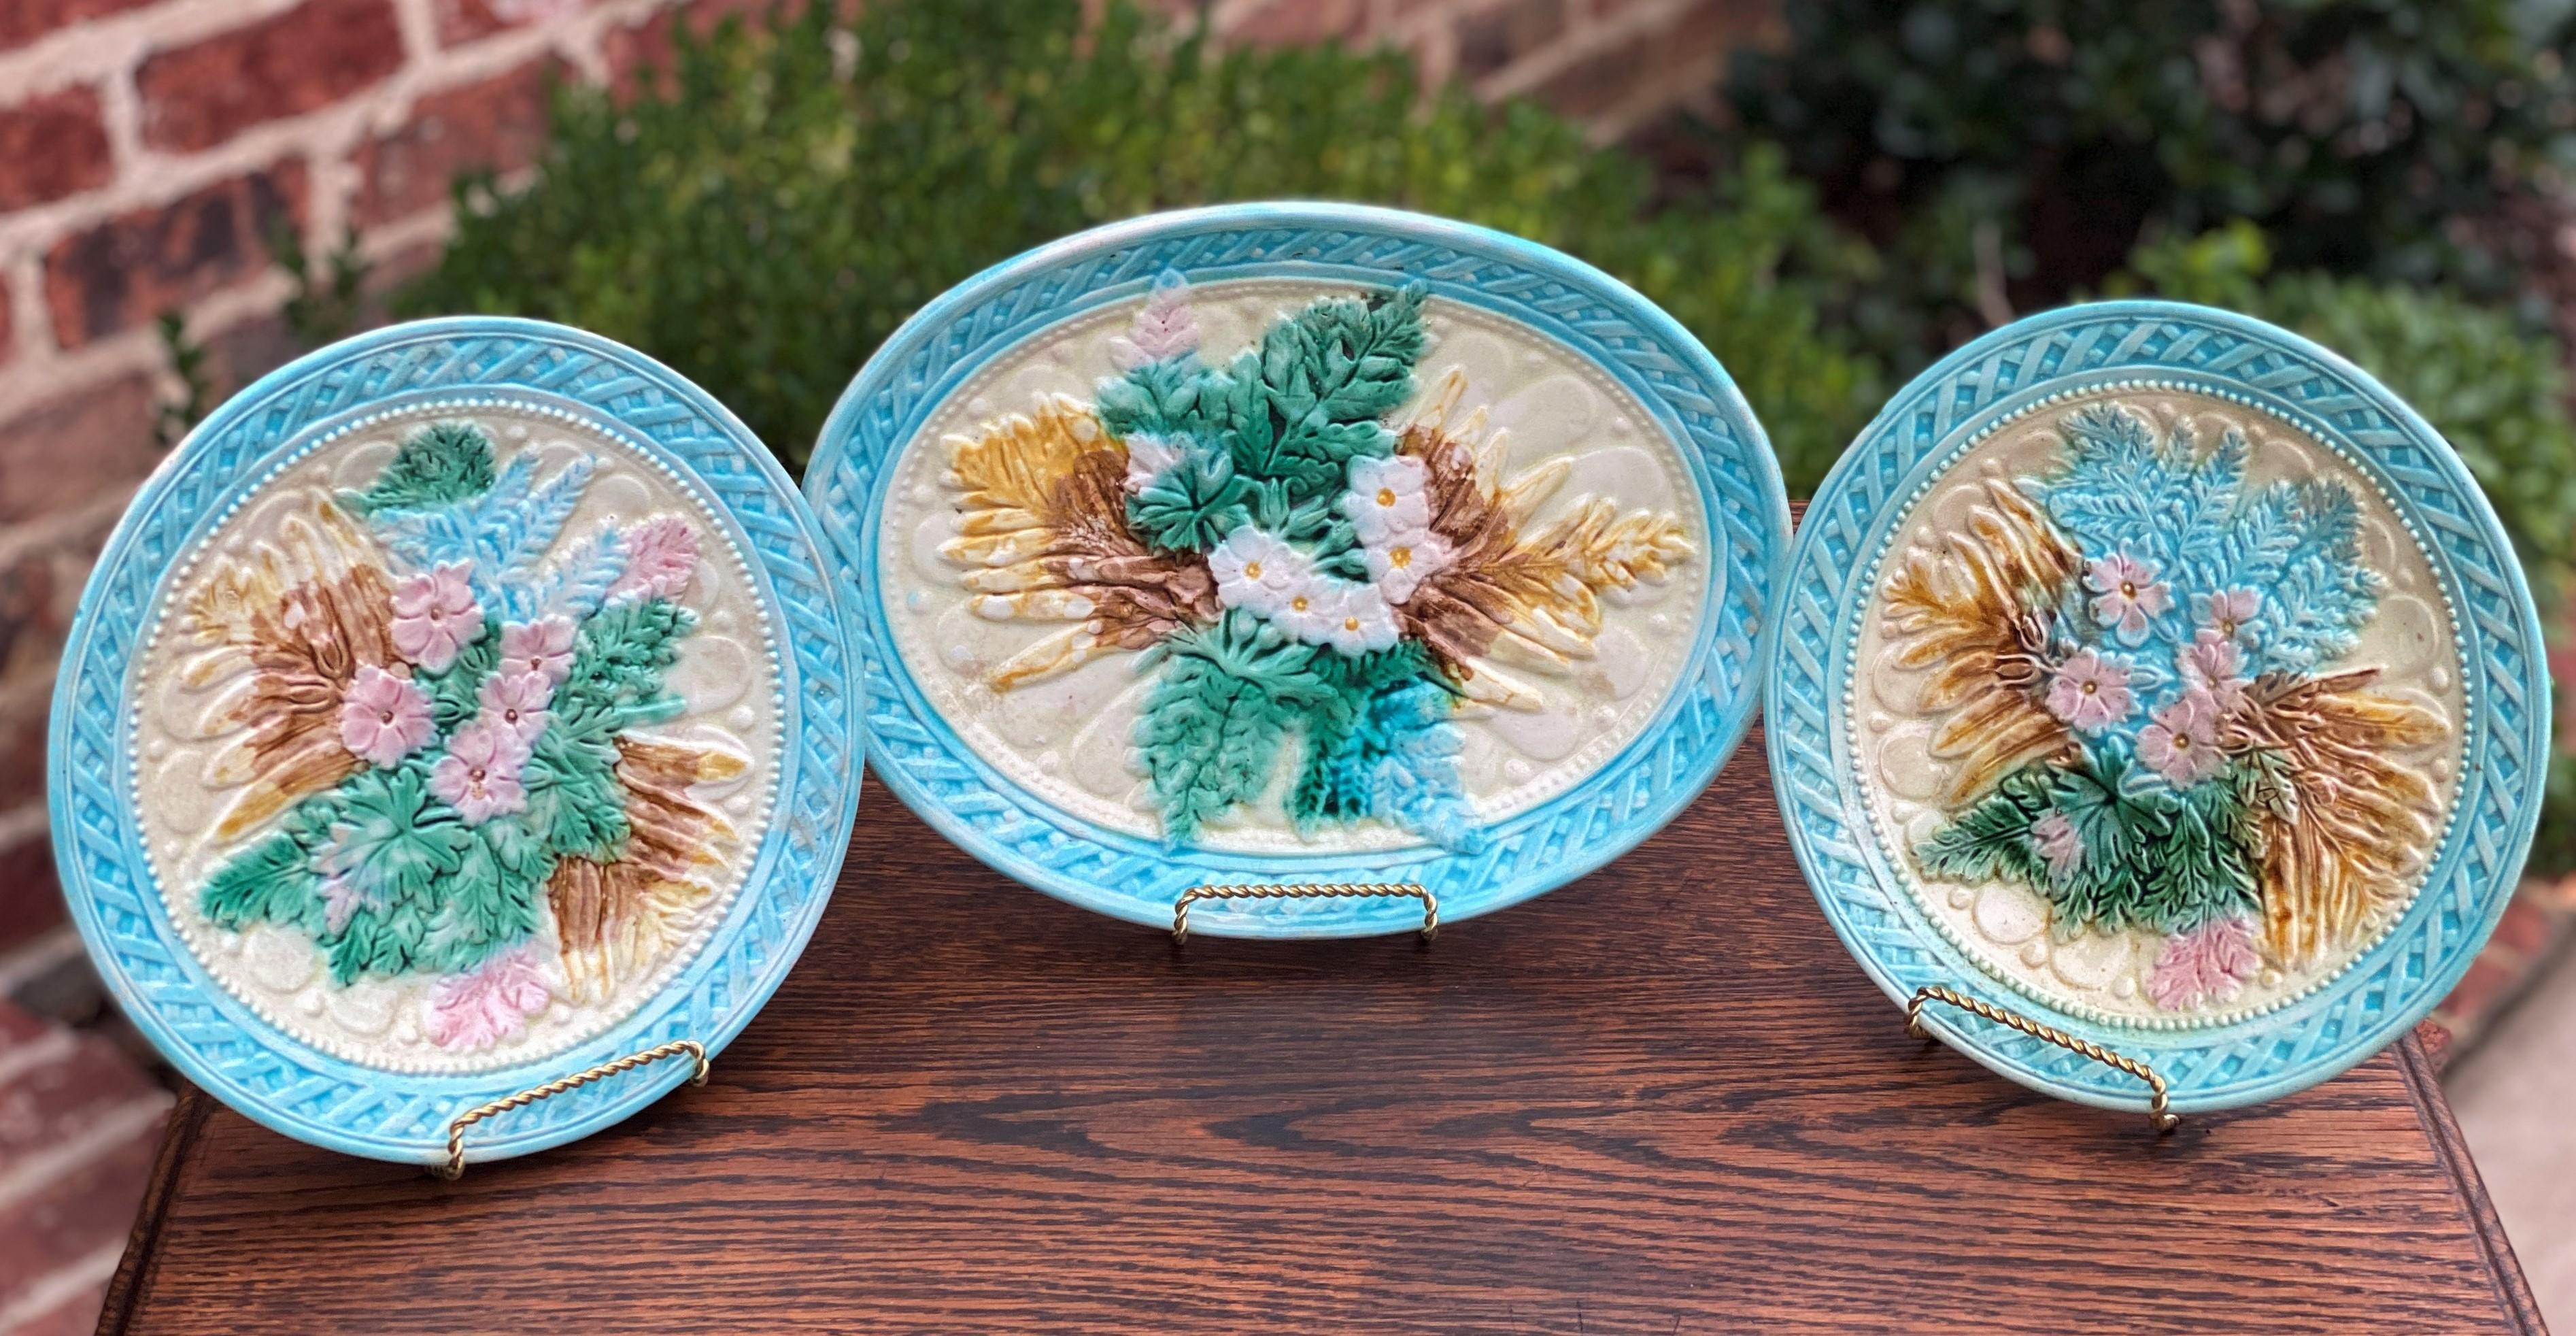 Victorian Antique French Majolica Set of 3 Plates Platter Floral Pastel Green Pink Blue For Sale